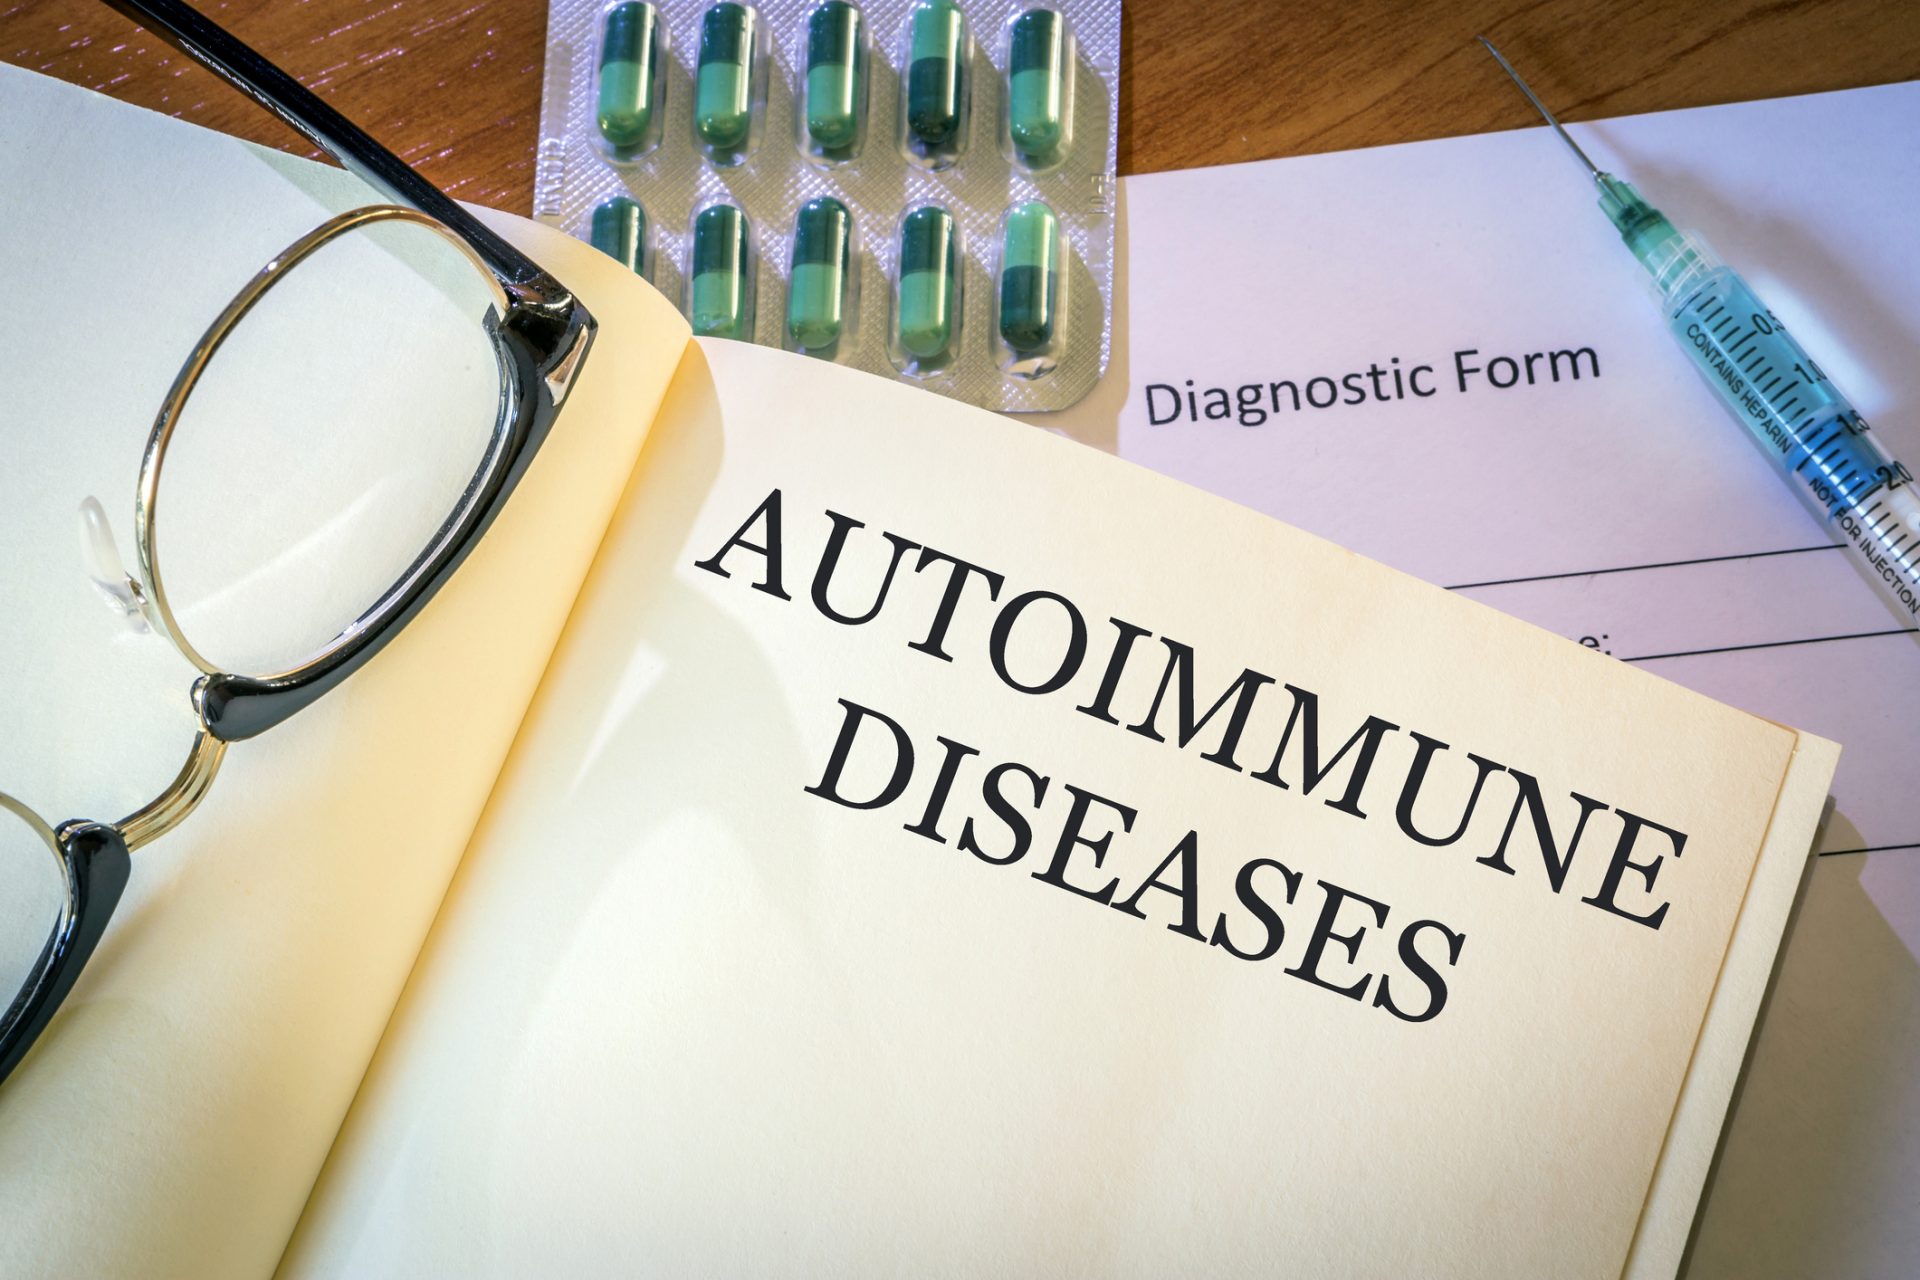 Study finds autoimmune diseases affect more people than scientists thought